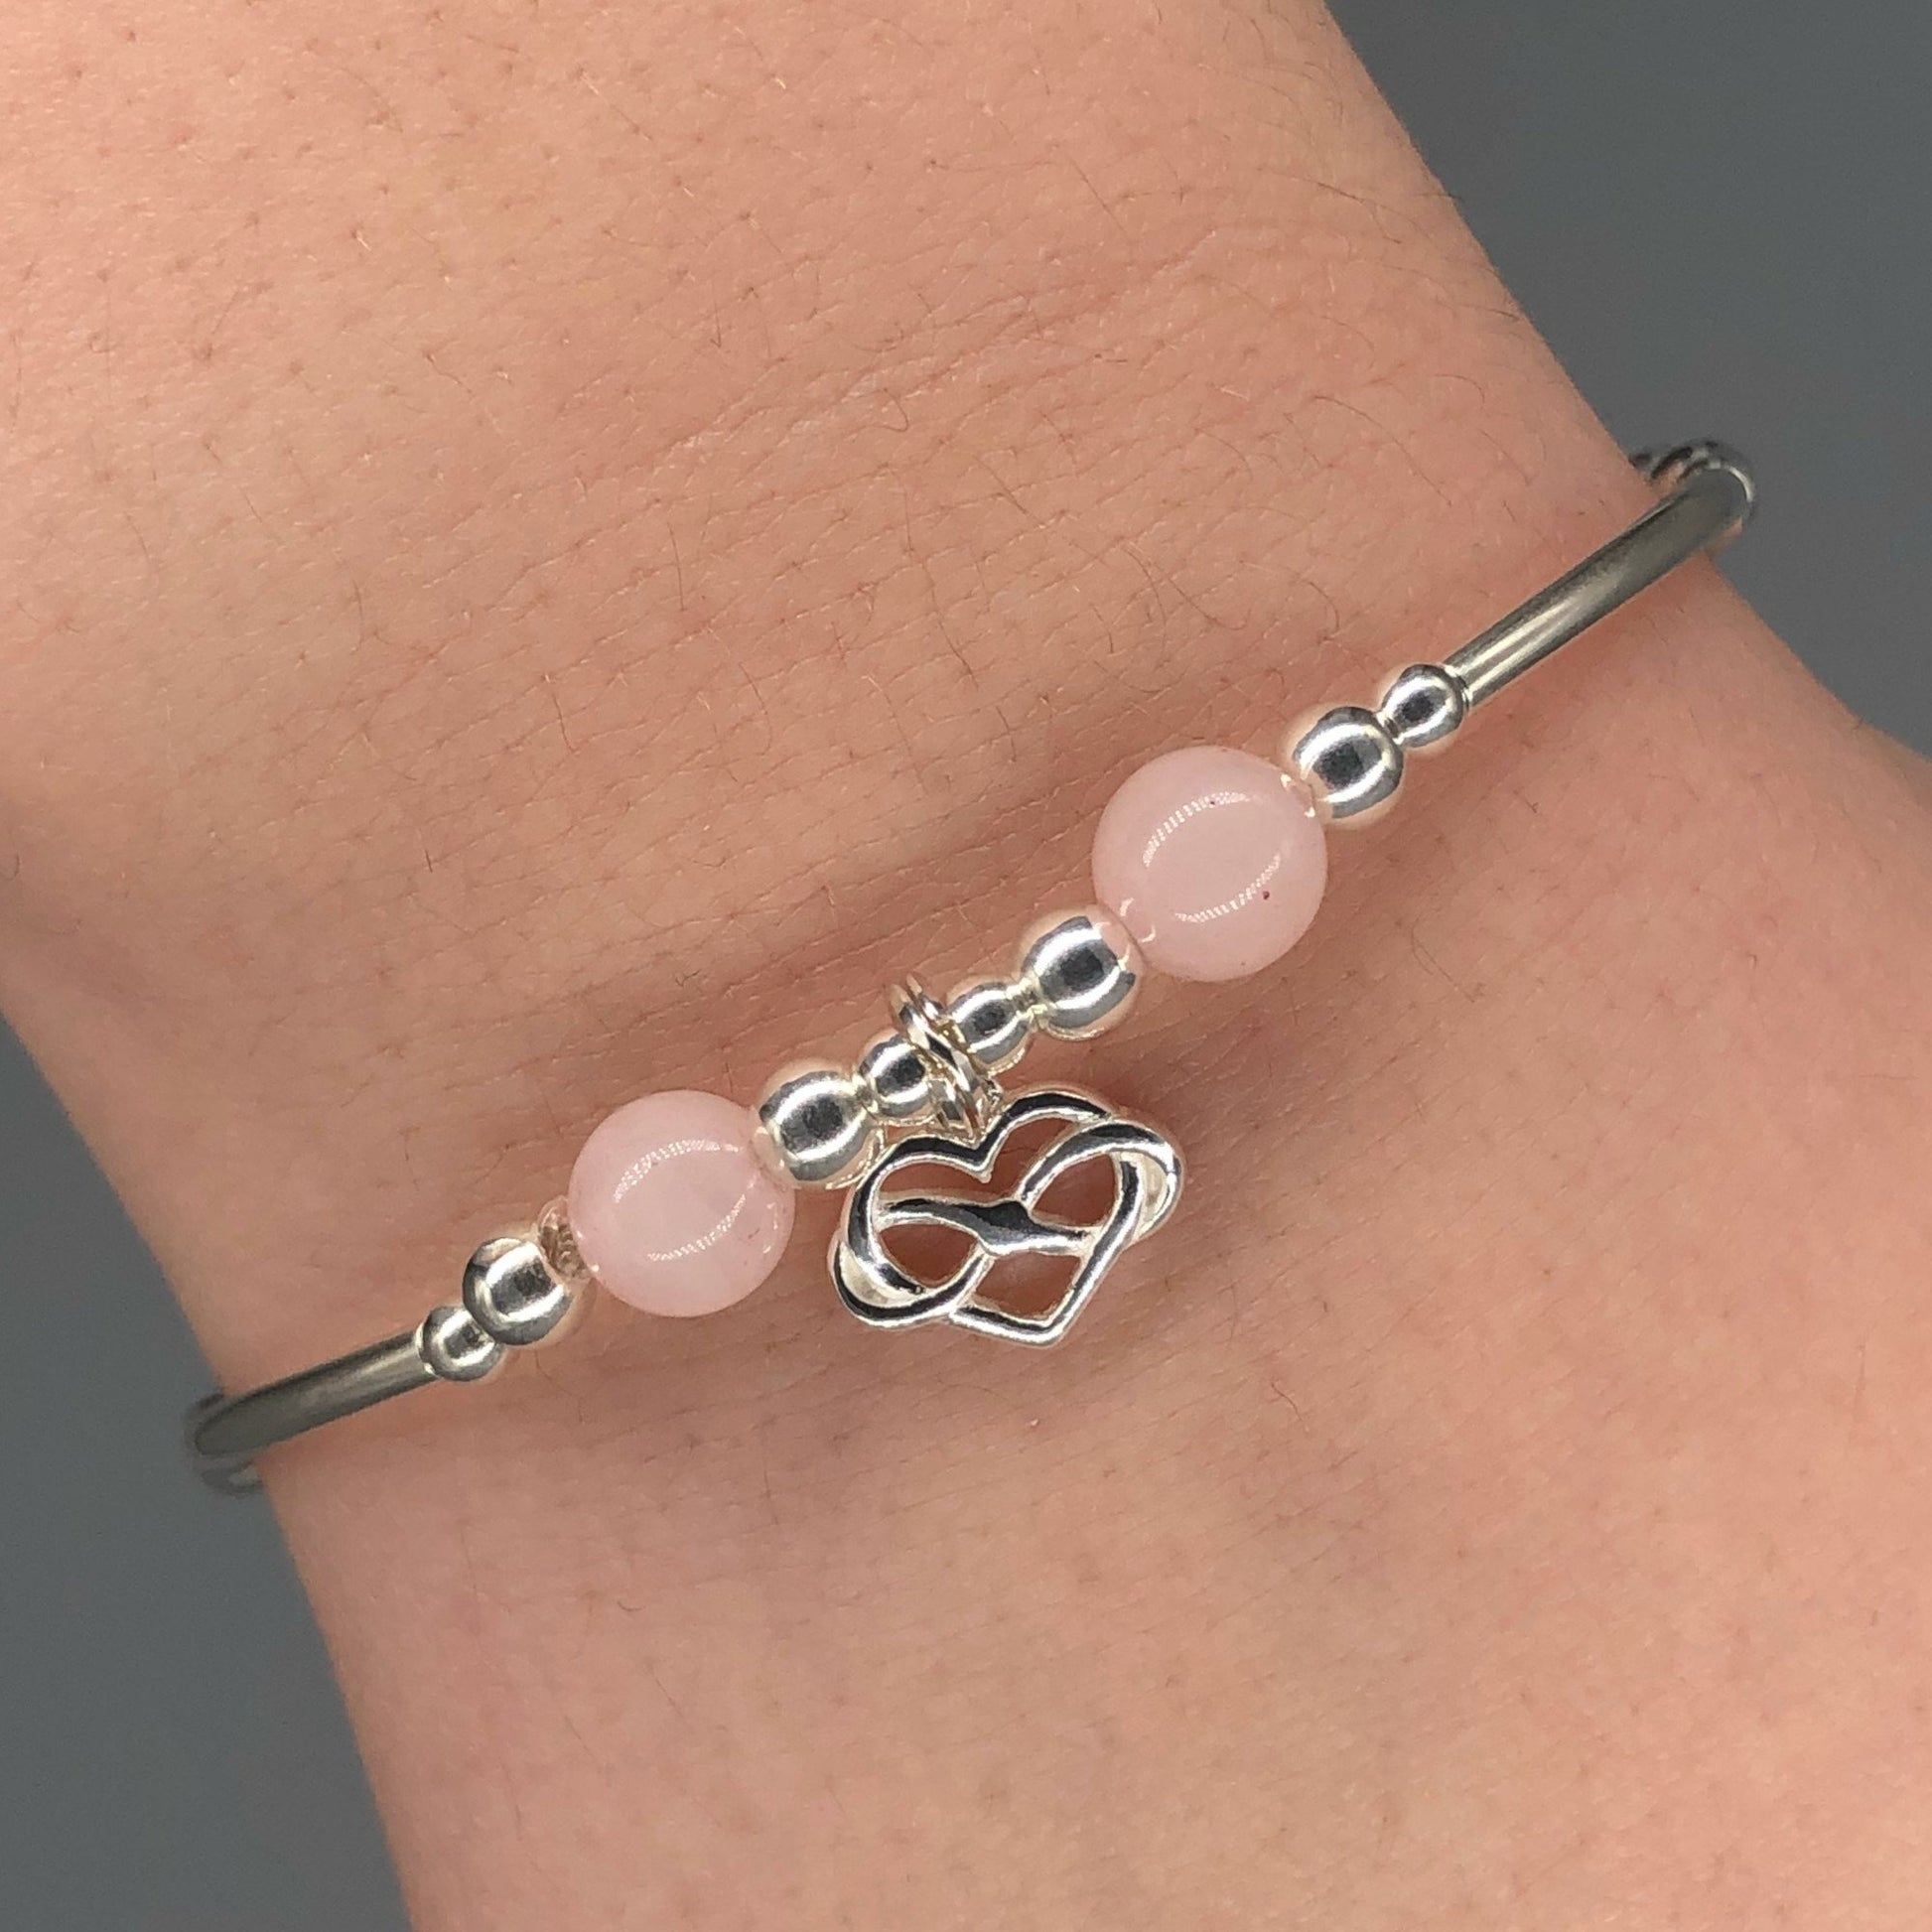 Infinity heart rose quartz & sterling silver stacking charm bracelet by My Silver Wish